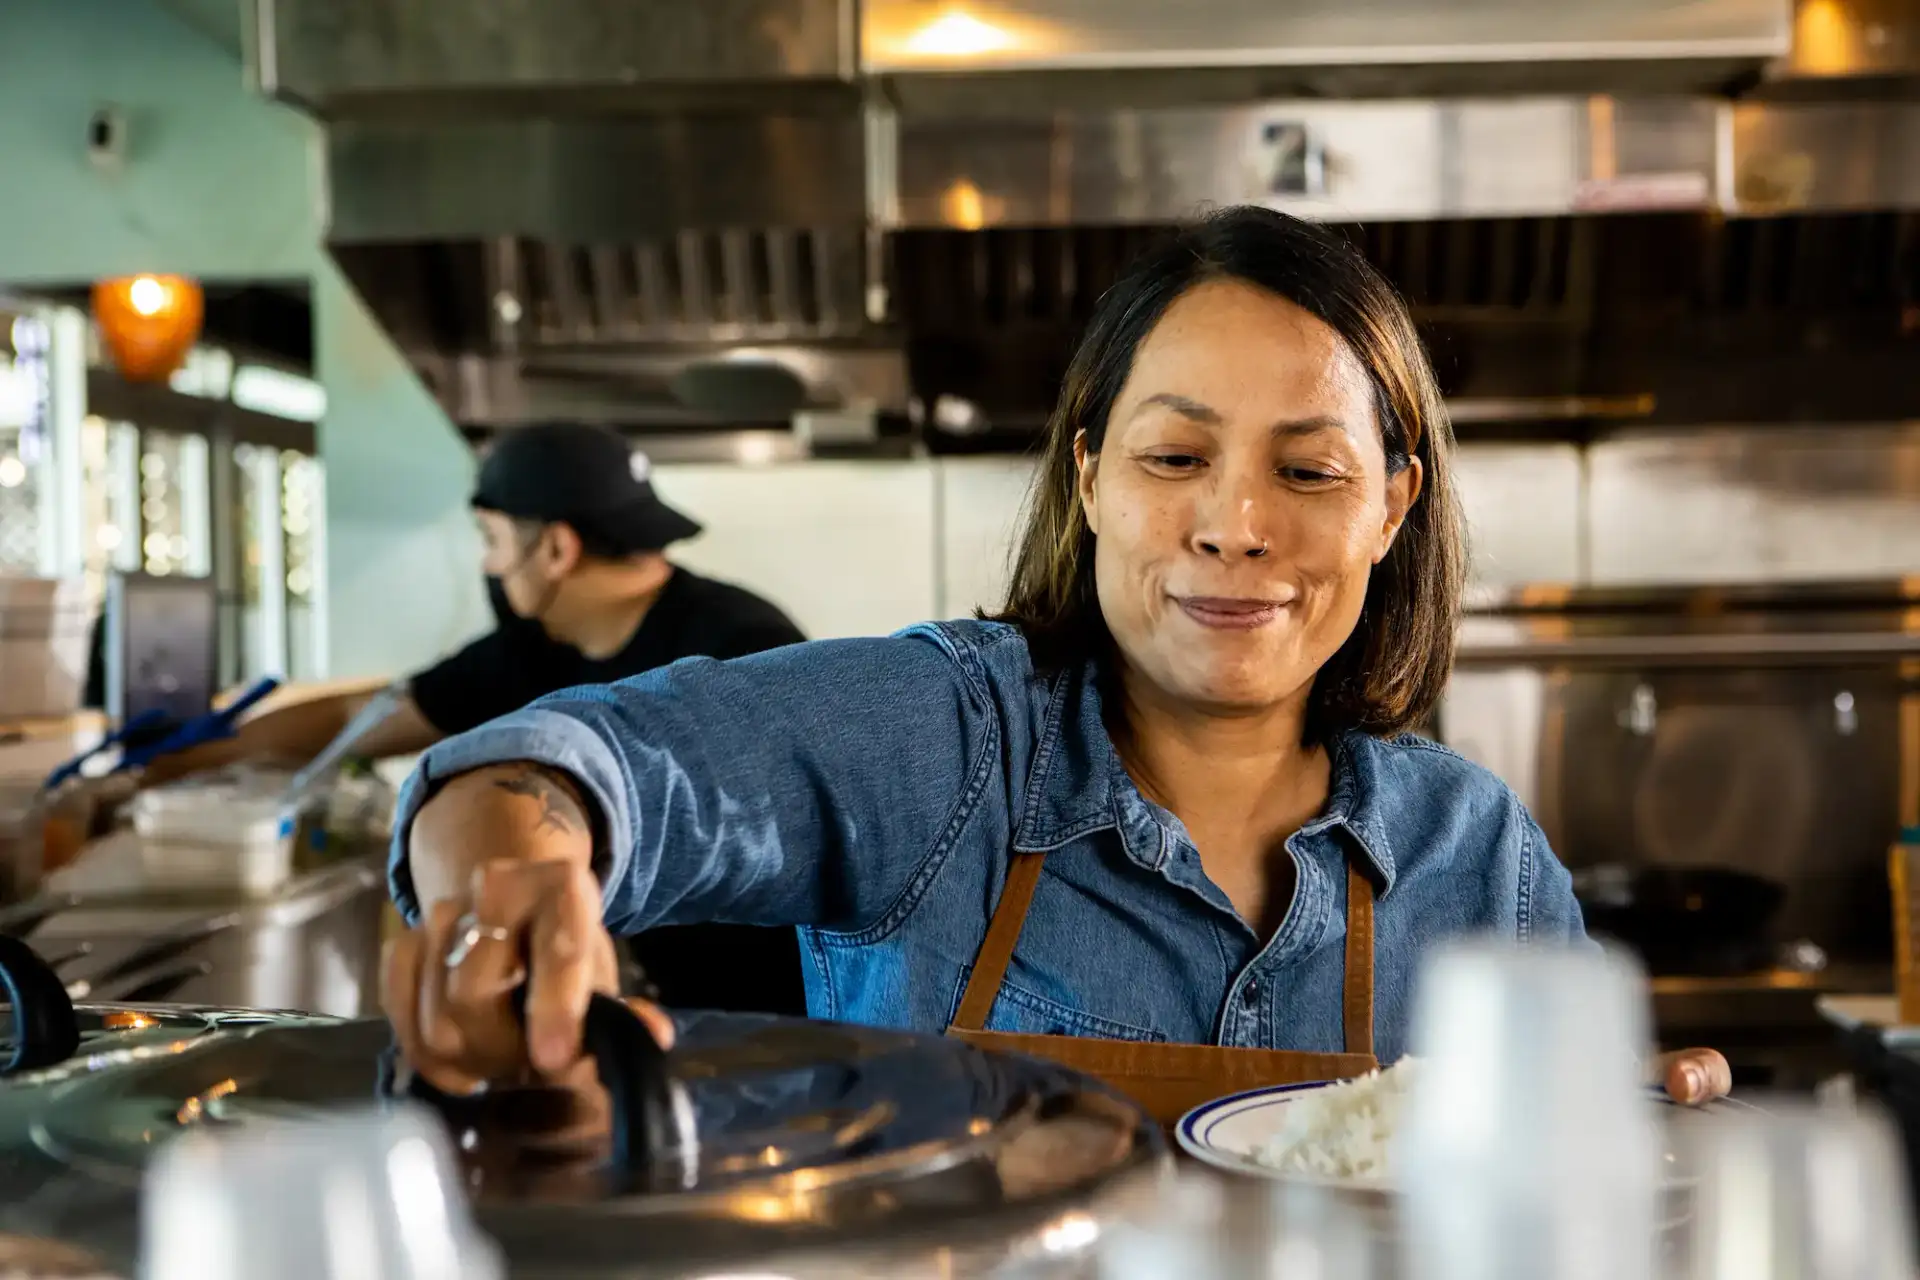 Smiling person at work in a professional kitchen holds a bowl with rice and lifts a pot lid as they plate a meal.